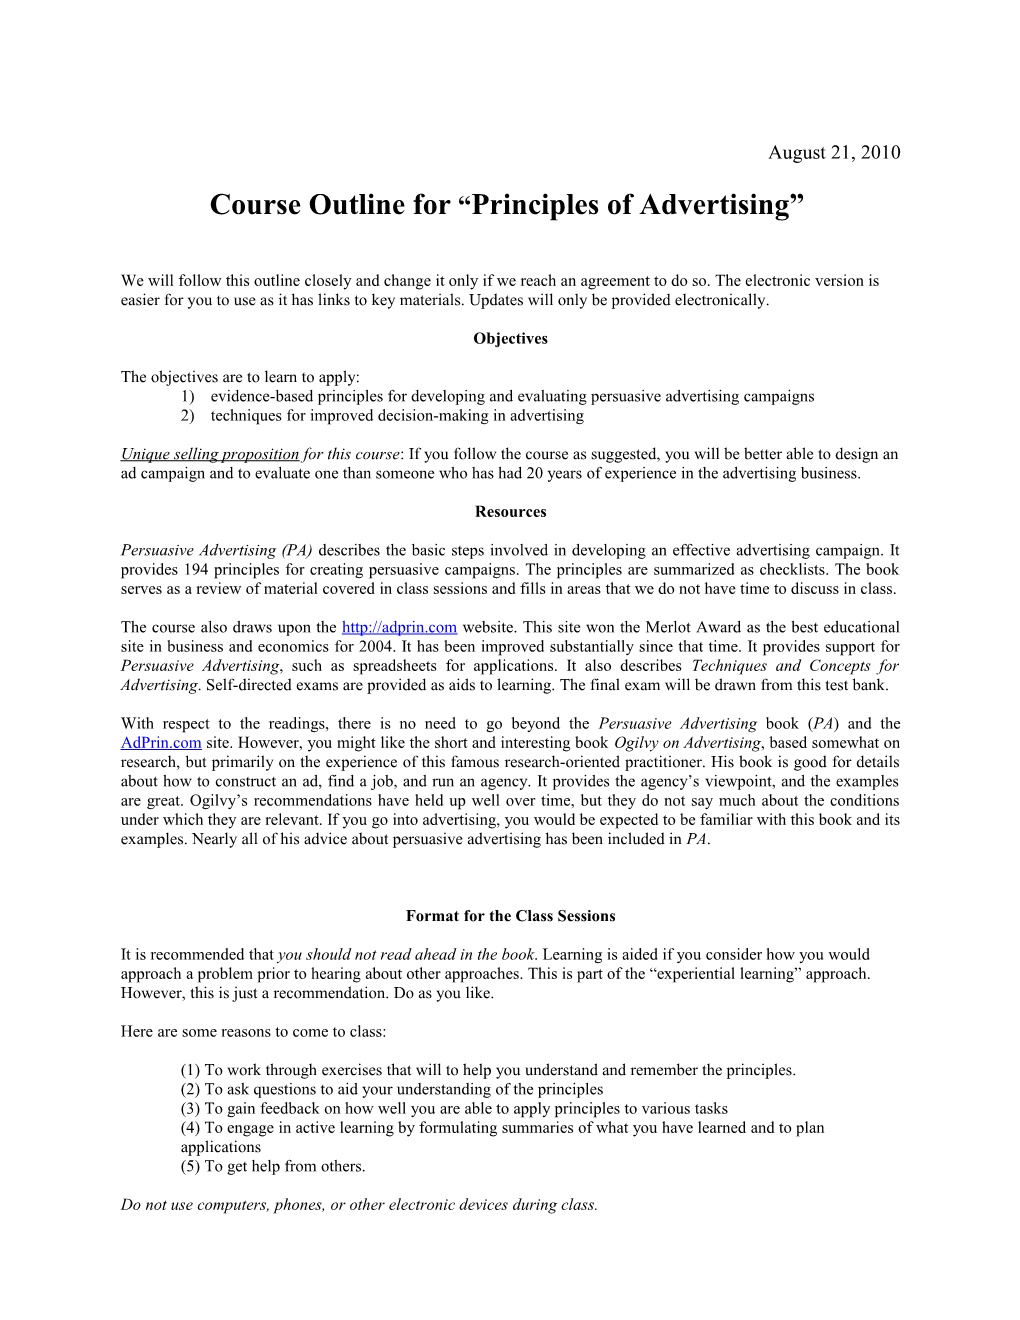 Course Outline for Principles of Advertising